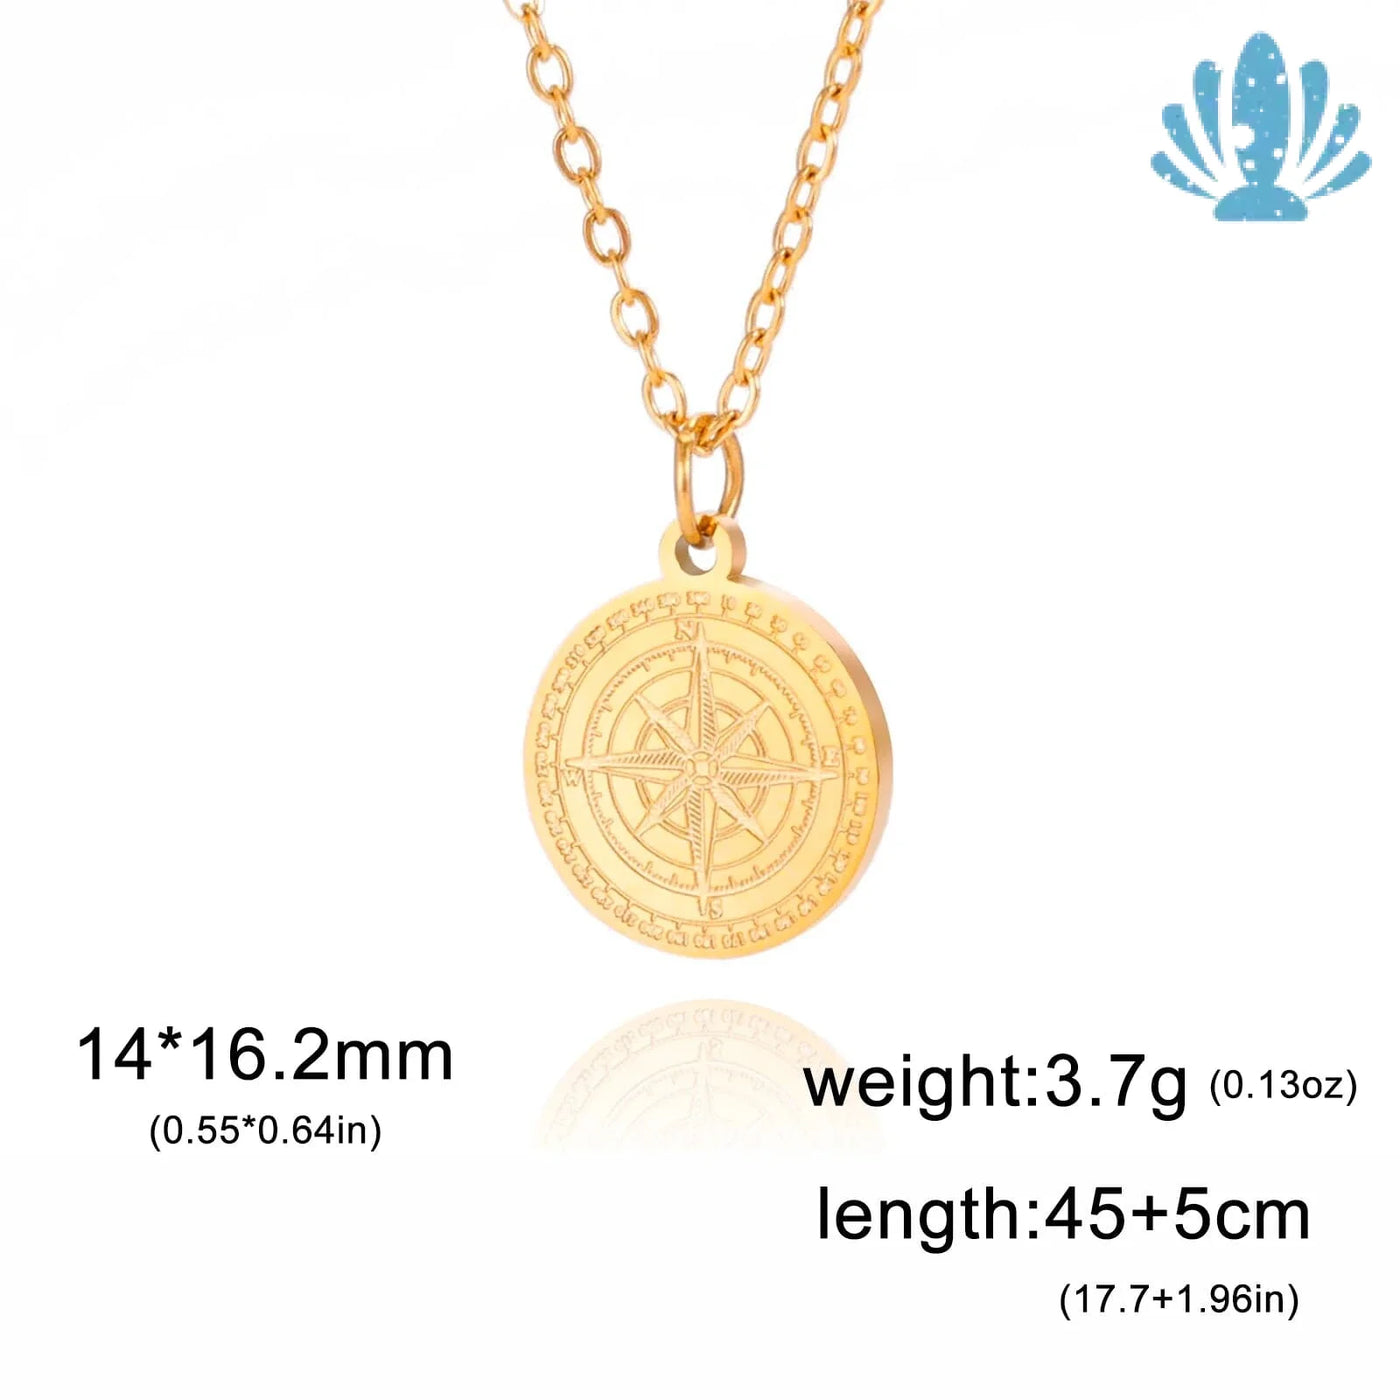 Compass charm necklace